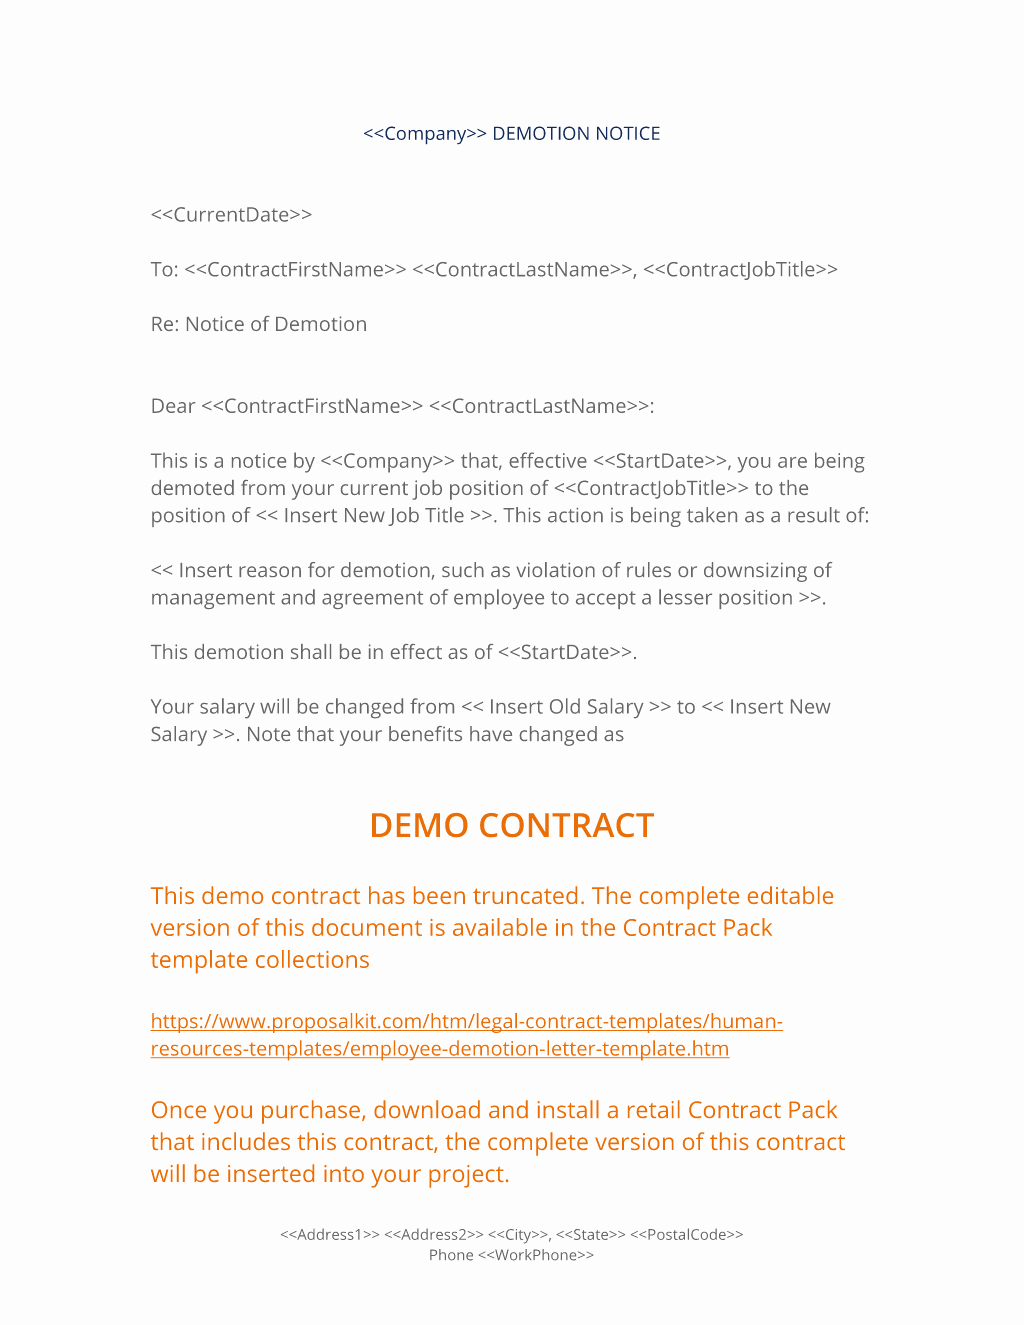 demotion letter template example-Voluntary Demotion Letter Template Unique Employee Demotion Letter Use the Employee Demotion Letter to 10-b